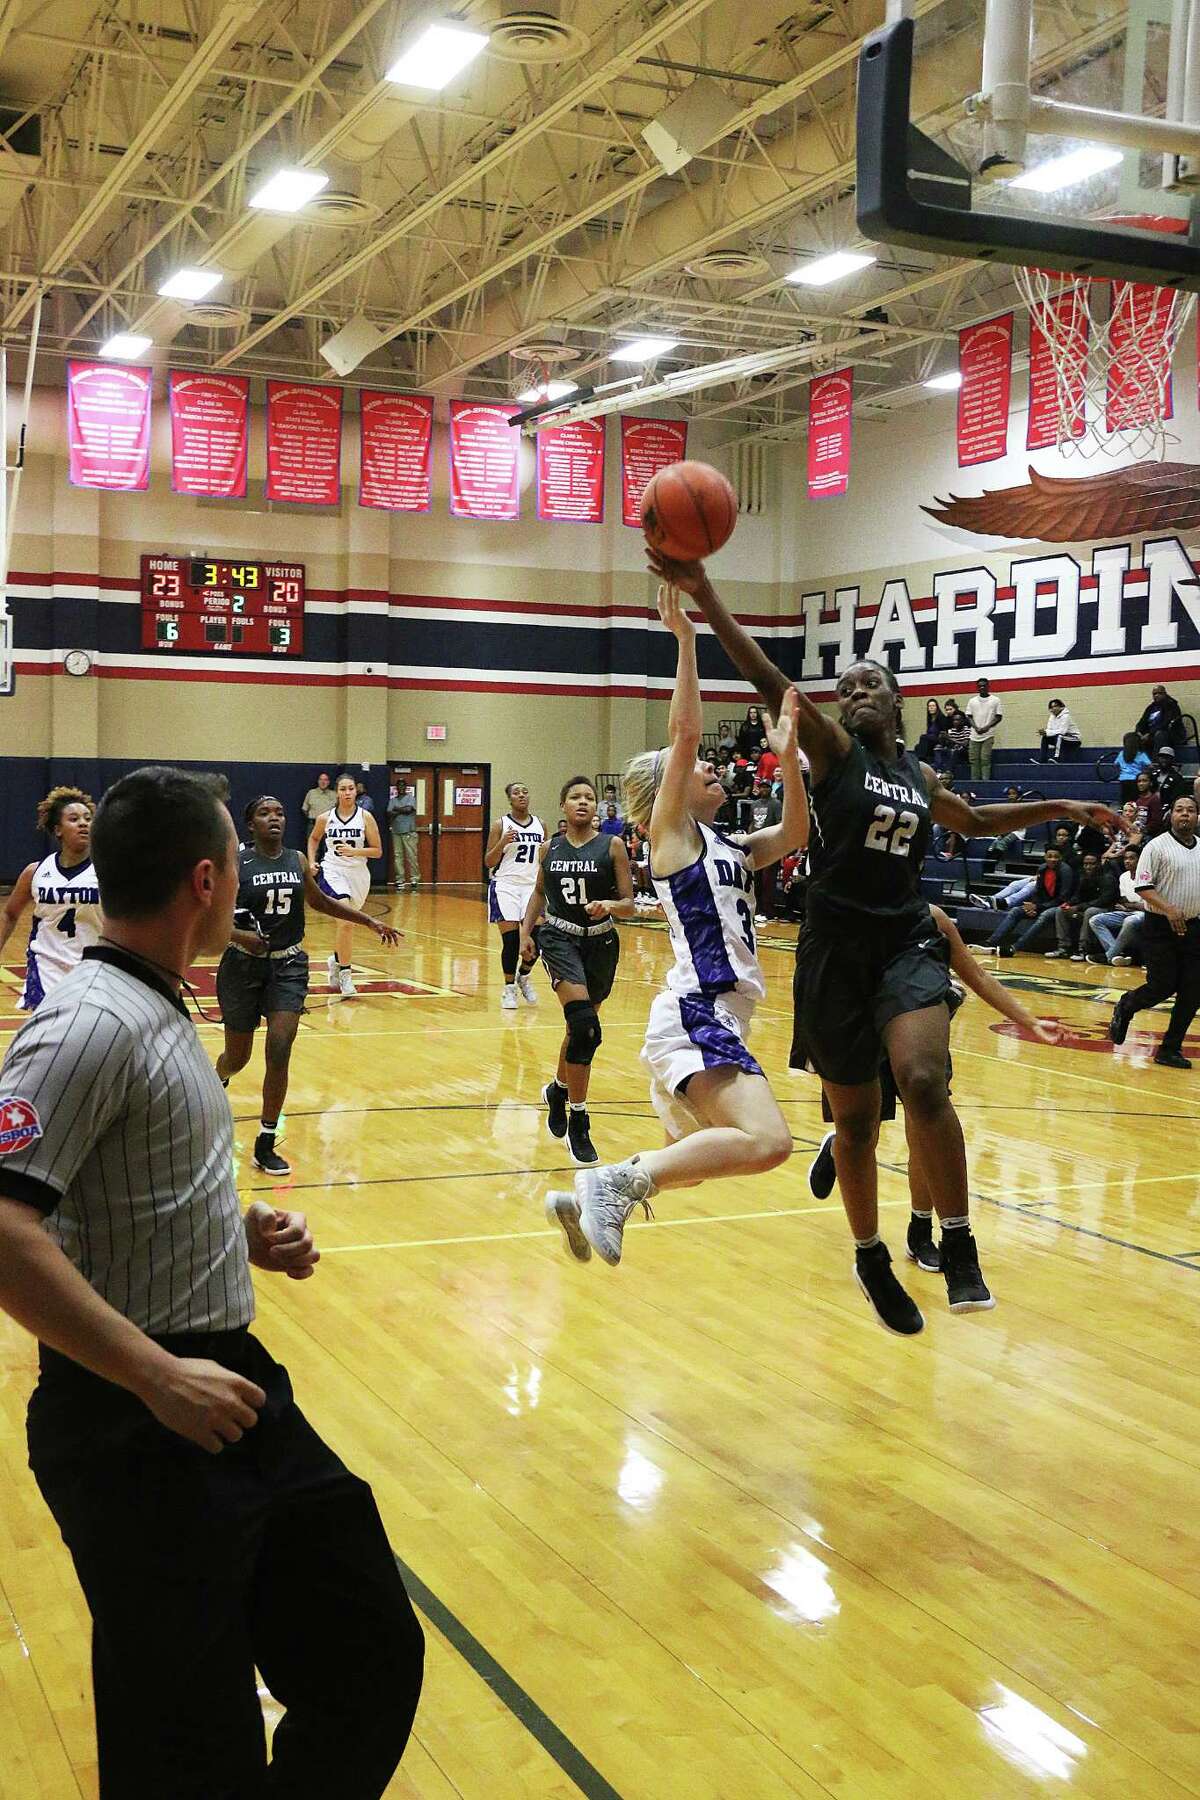 Kayleigh Davis has her shot blocked on the break by the much taller Lady Jaguars Anastacia Mickens. Mickens finished the night with 33 points and was a force under the basket all night long.